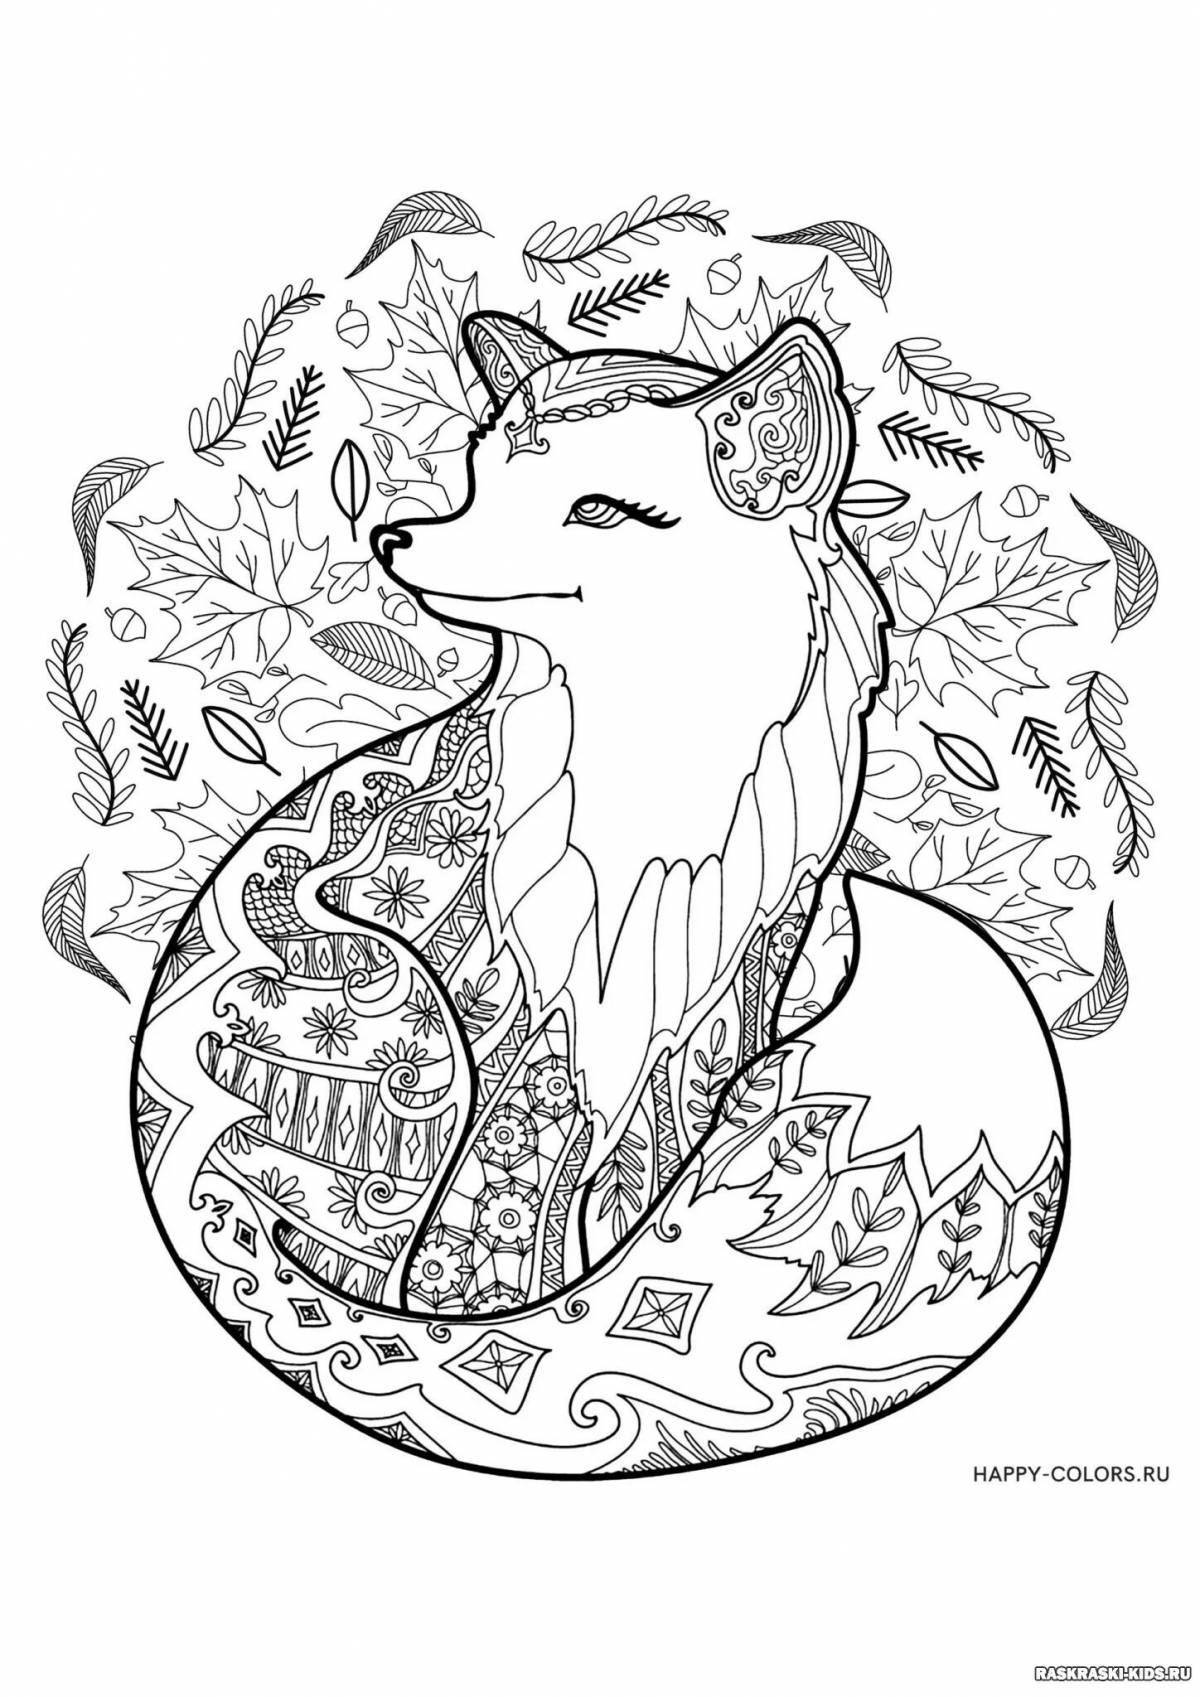 Charming fox complex coloring book